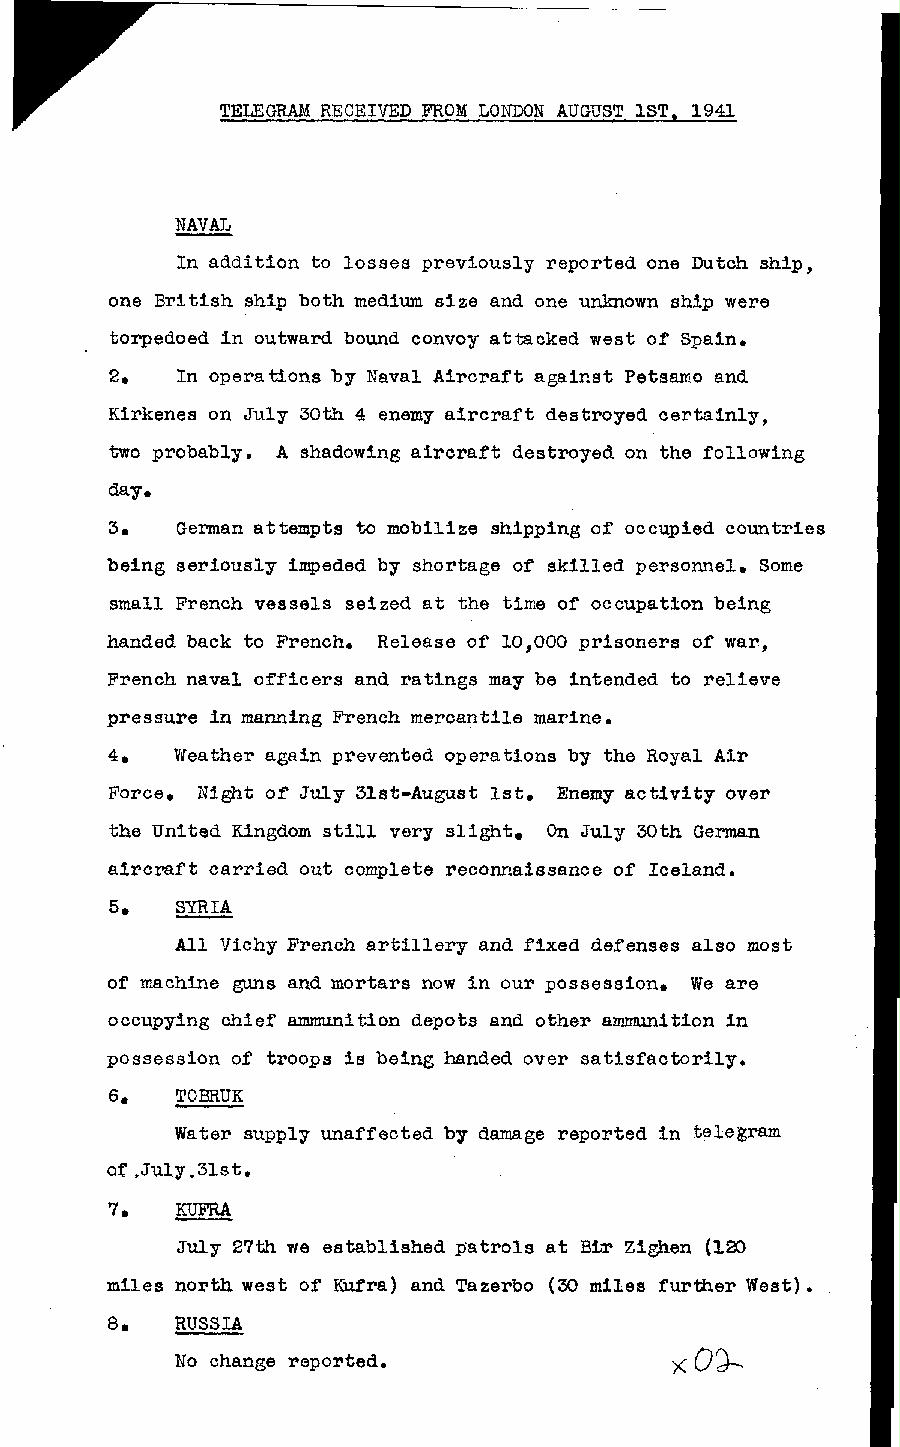 [a322x02.jpg] - Report on military situation 8/1/41